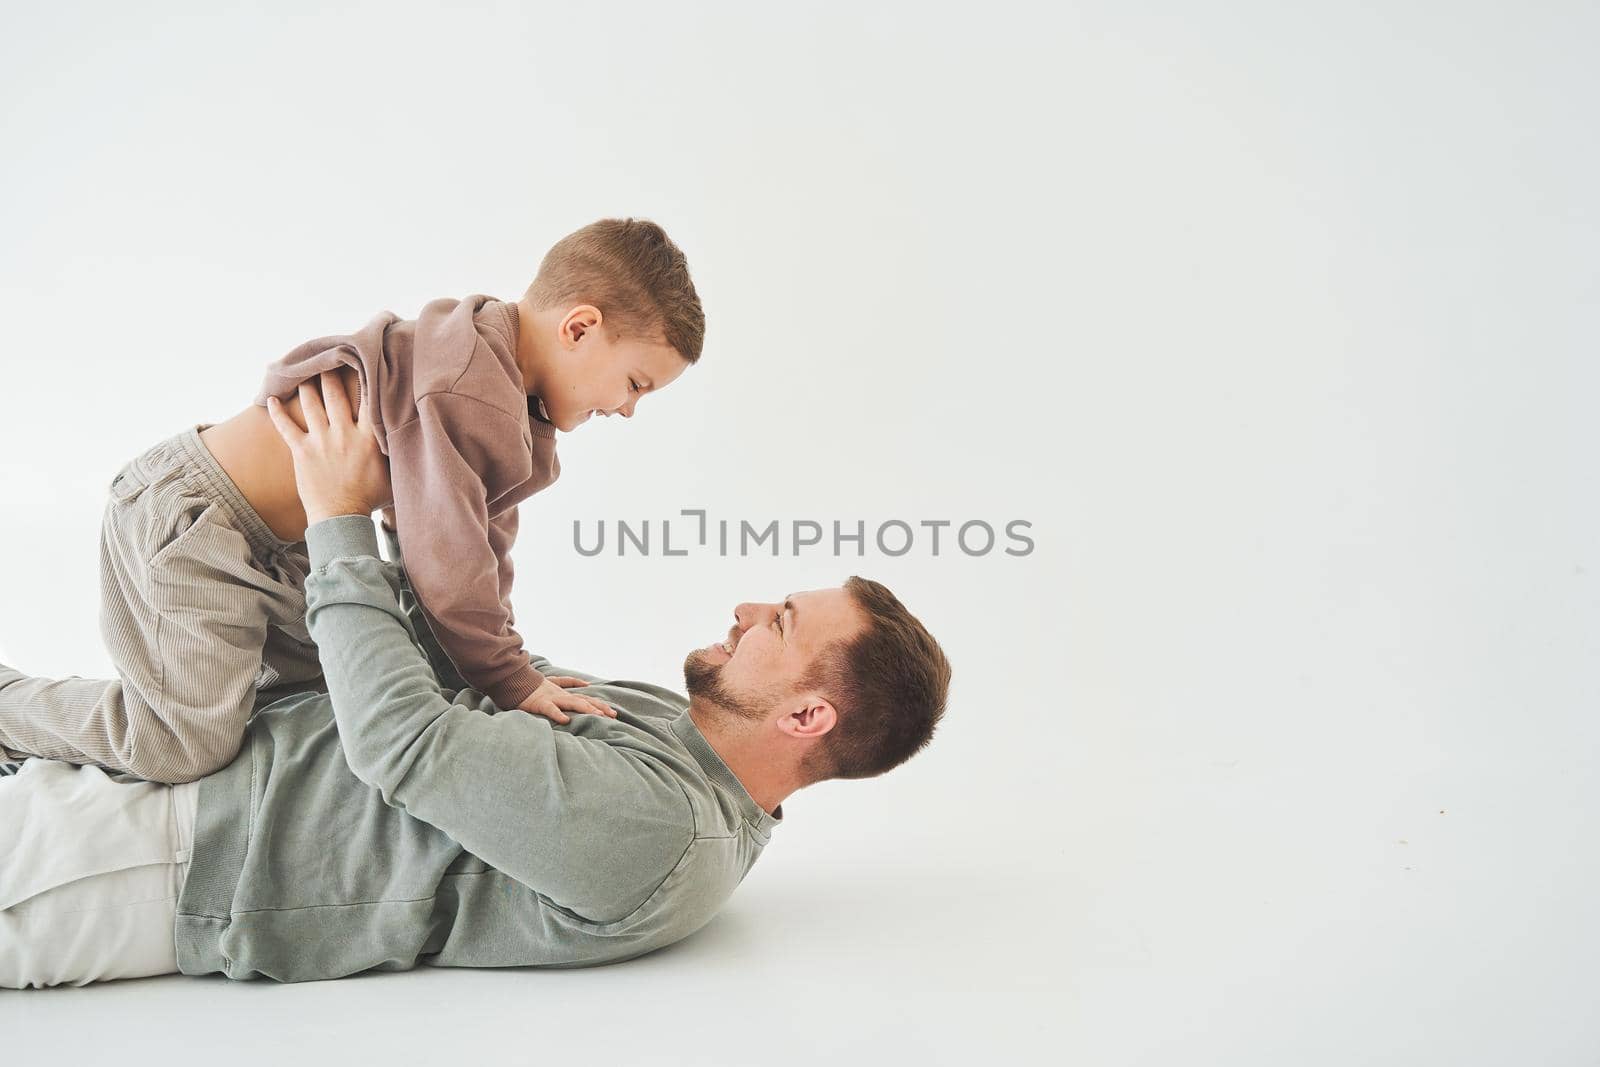 Father raises his son and plays with him, have fun and spend time together. Paternity. Handsome son in his fathers arms